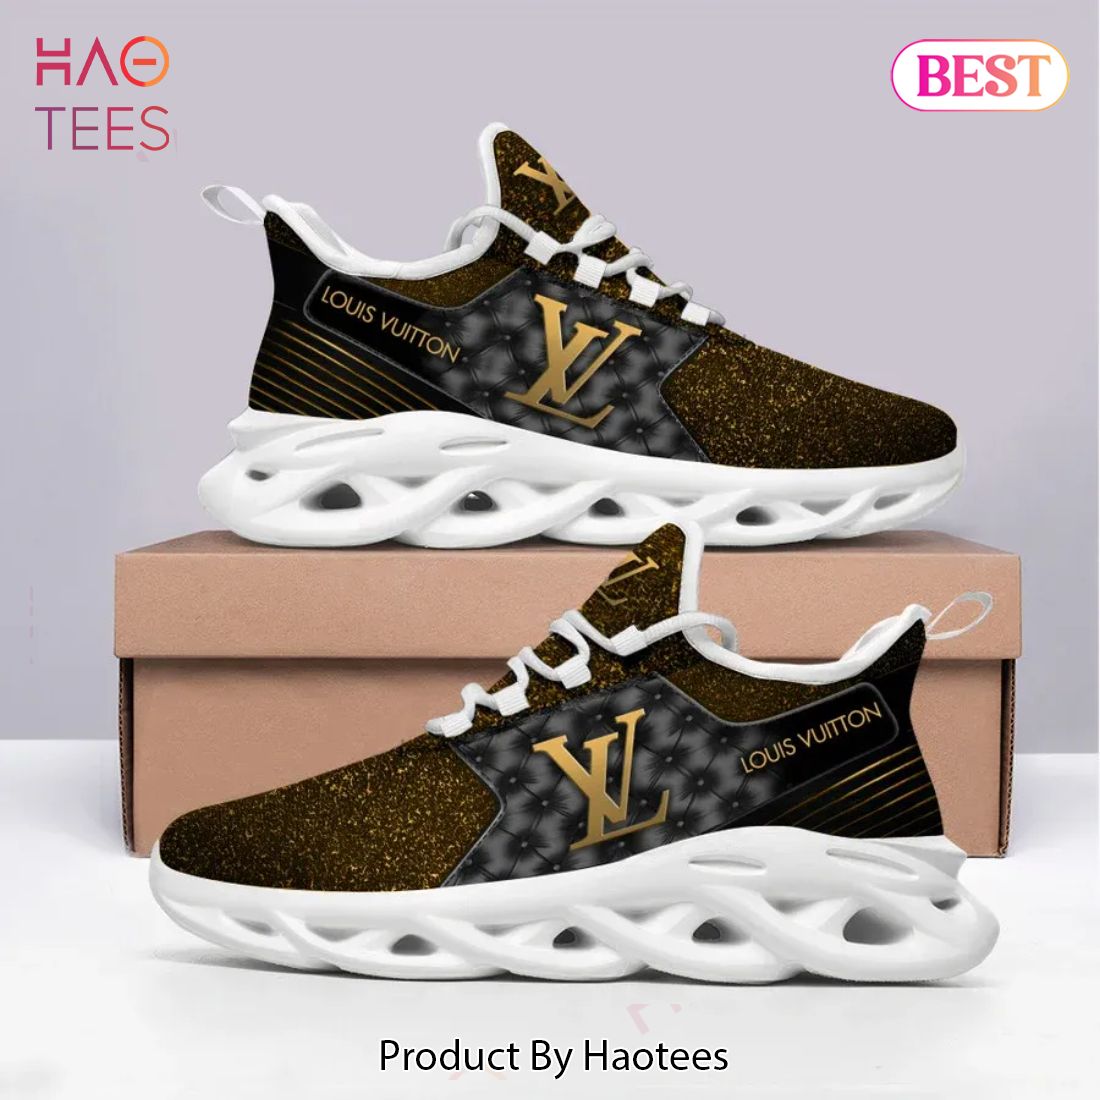 [NEW FASHION] Louis Vuitton Bling Max Soul Shoes Luxury Brand Gifts For Men Women